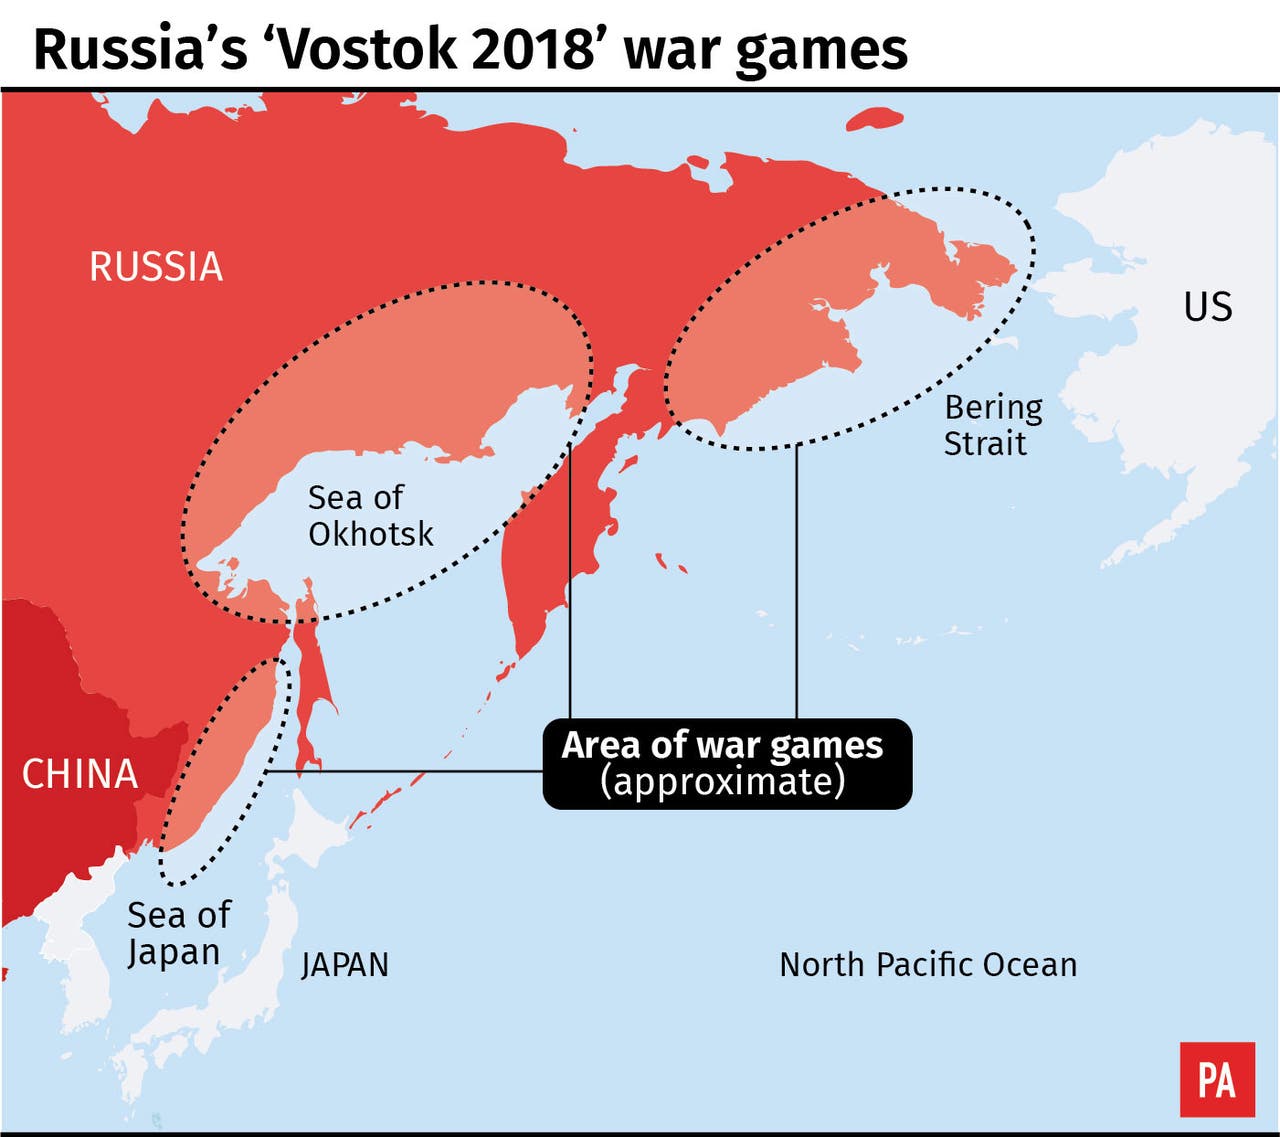 Russia and China to conduct regular war games together, minister says